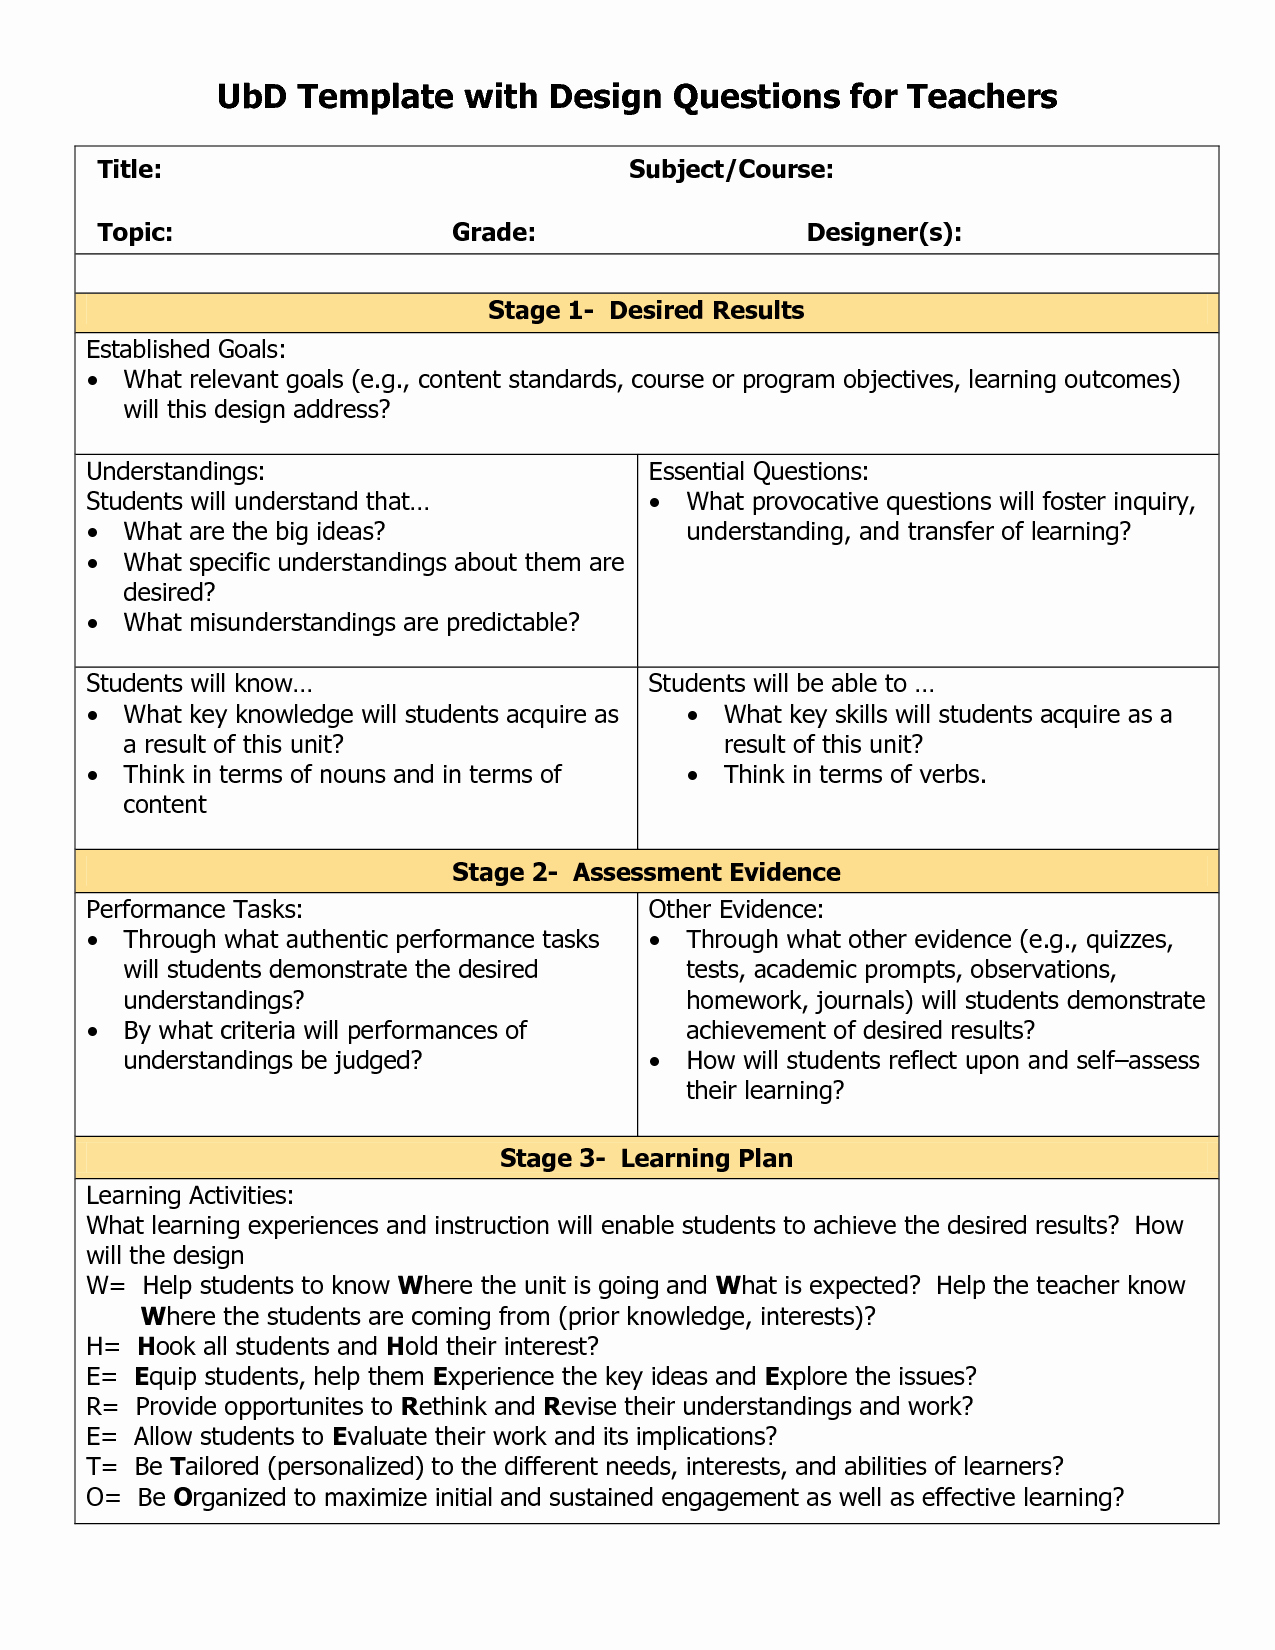 cooperative learning lesson plan template fresh blank ubd template things for the classroom of cooperative learning lesson plan template